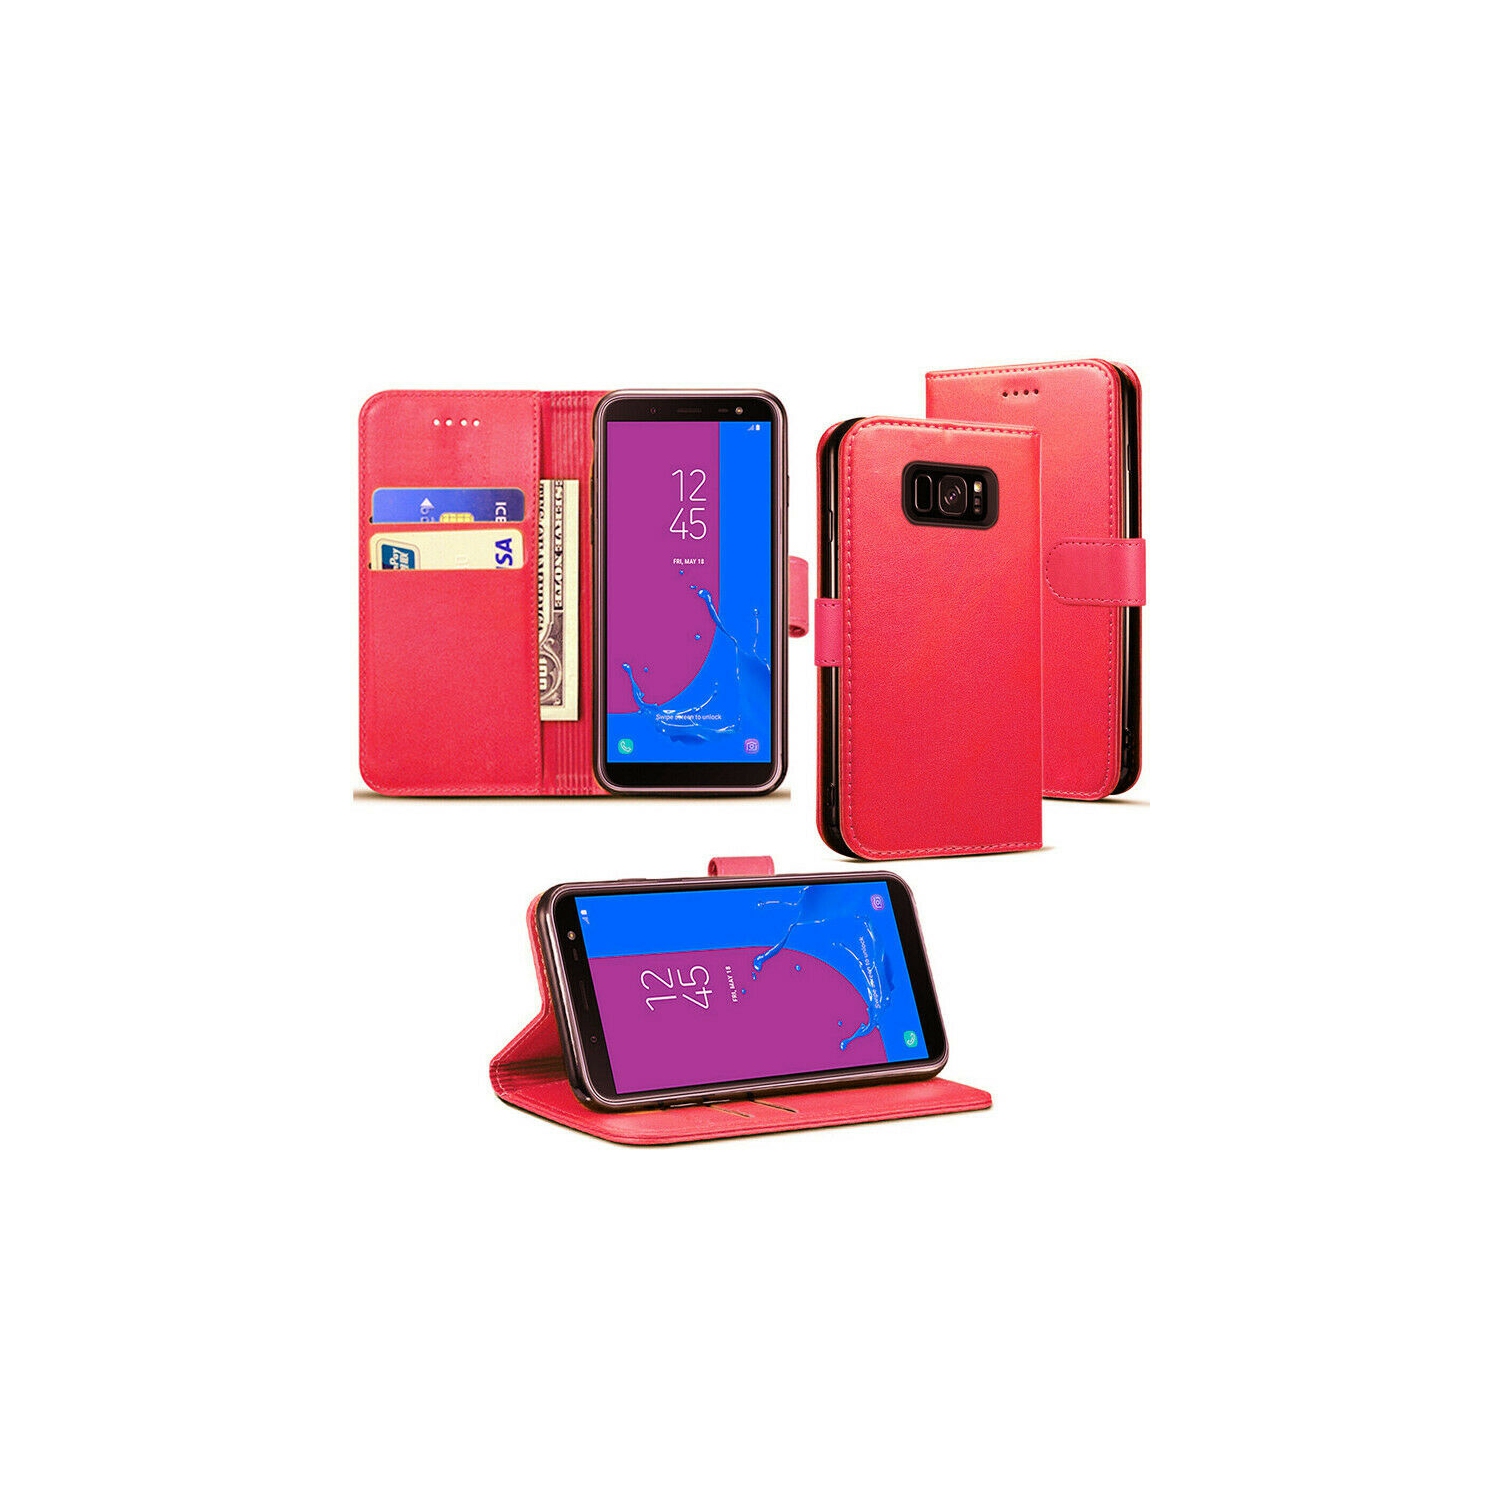 【CSmart】 Magnetic Card Slot Leather Folio Wallet Flip Case Cover for Samsung Galaxy S7 Edge, Red